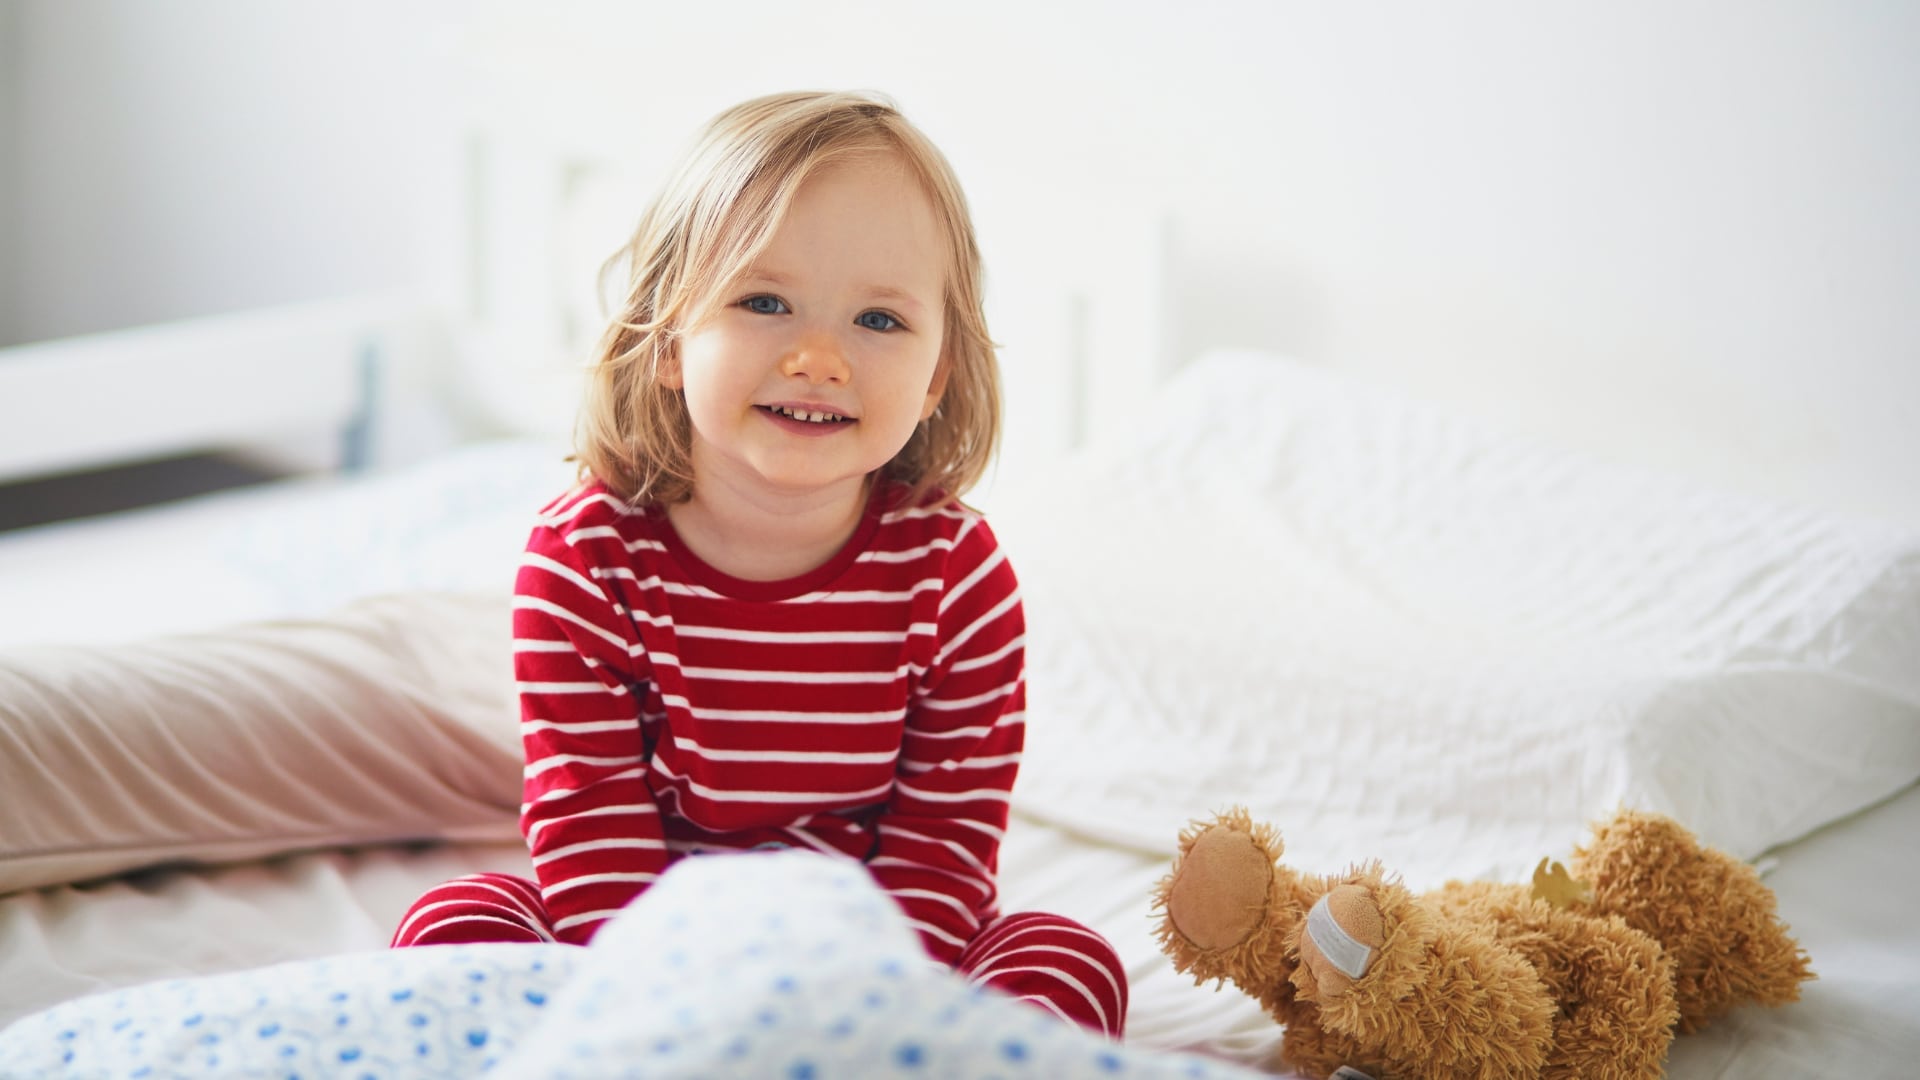 Toddler Won’t Stay in Bed: Tips for Encouraging Better Sleep Habits